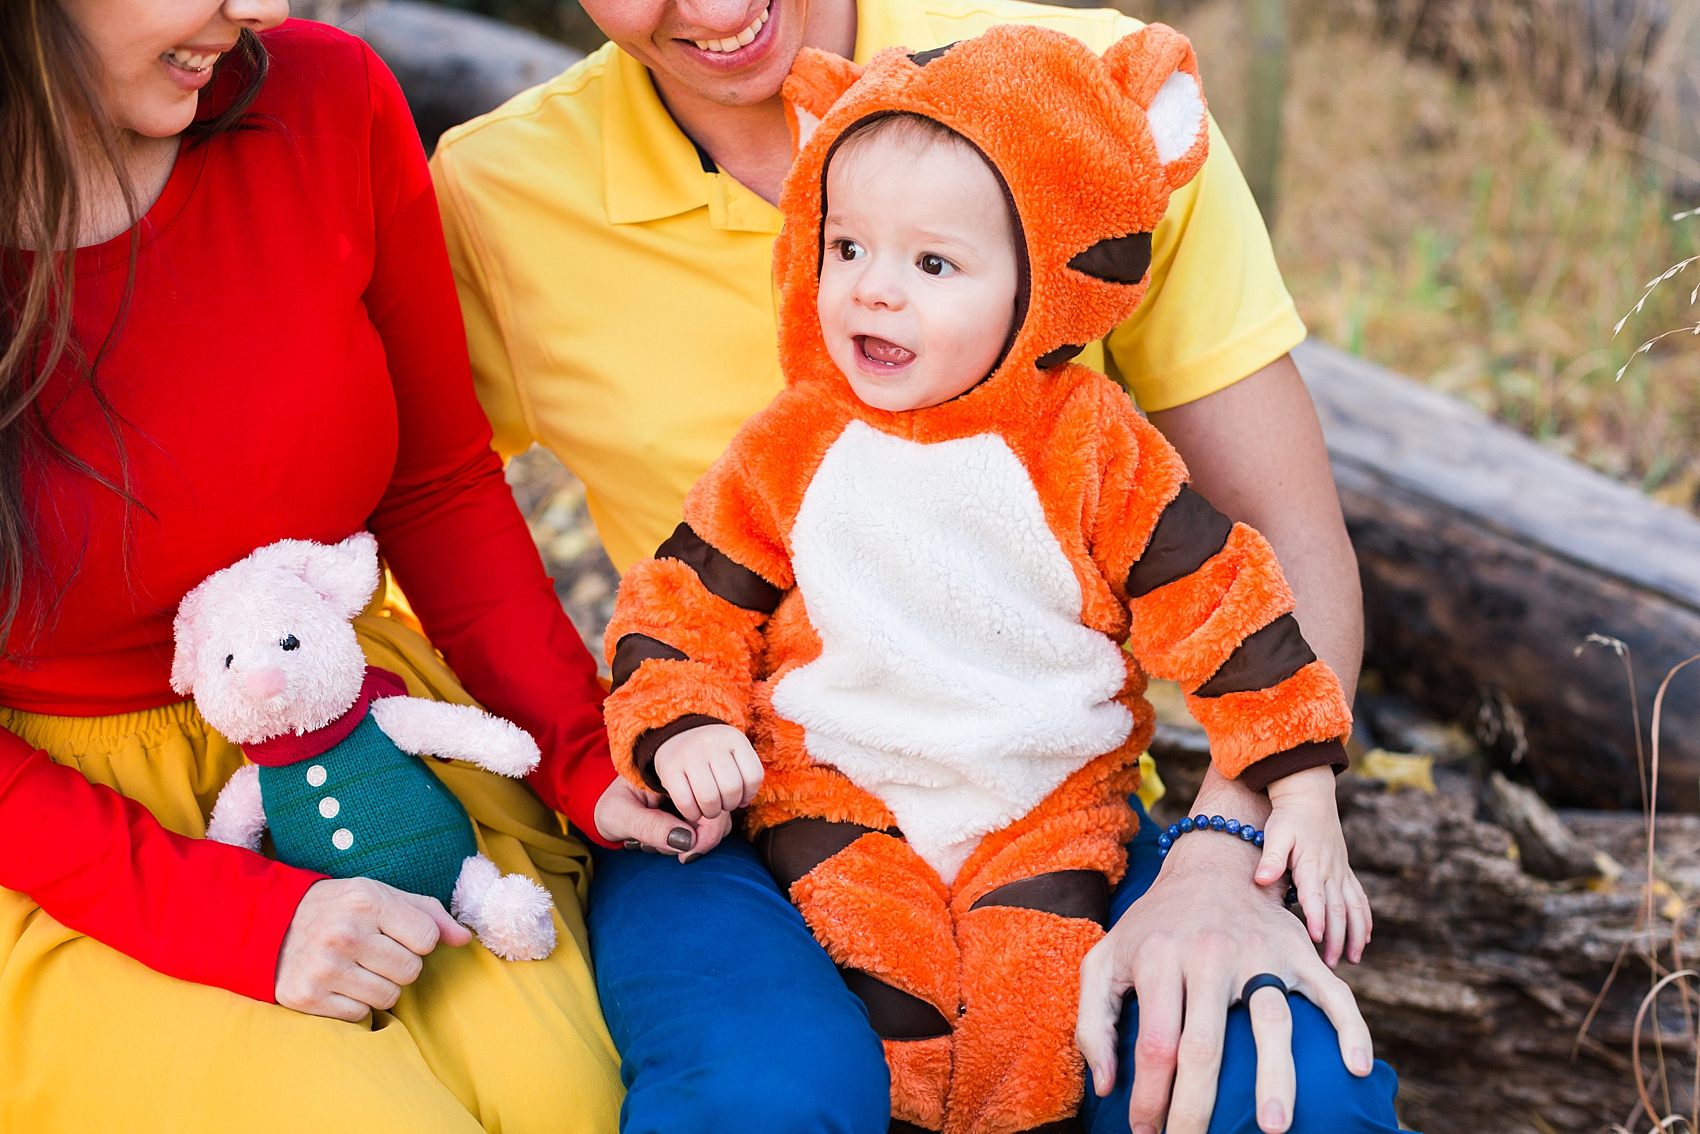 Leah Hope Photography | Flagstaff Arizona | Woods Forest Fall Family Pictures | Disney Bounding | Winnie The Pooh | Christopher Robin | Tigger | Adorable Disney Bounding Family | What to Wear | Family Poses